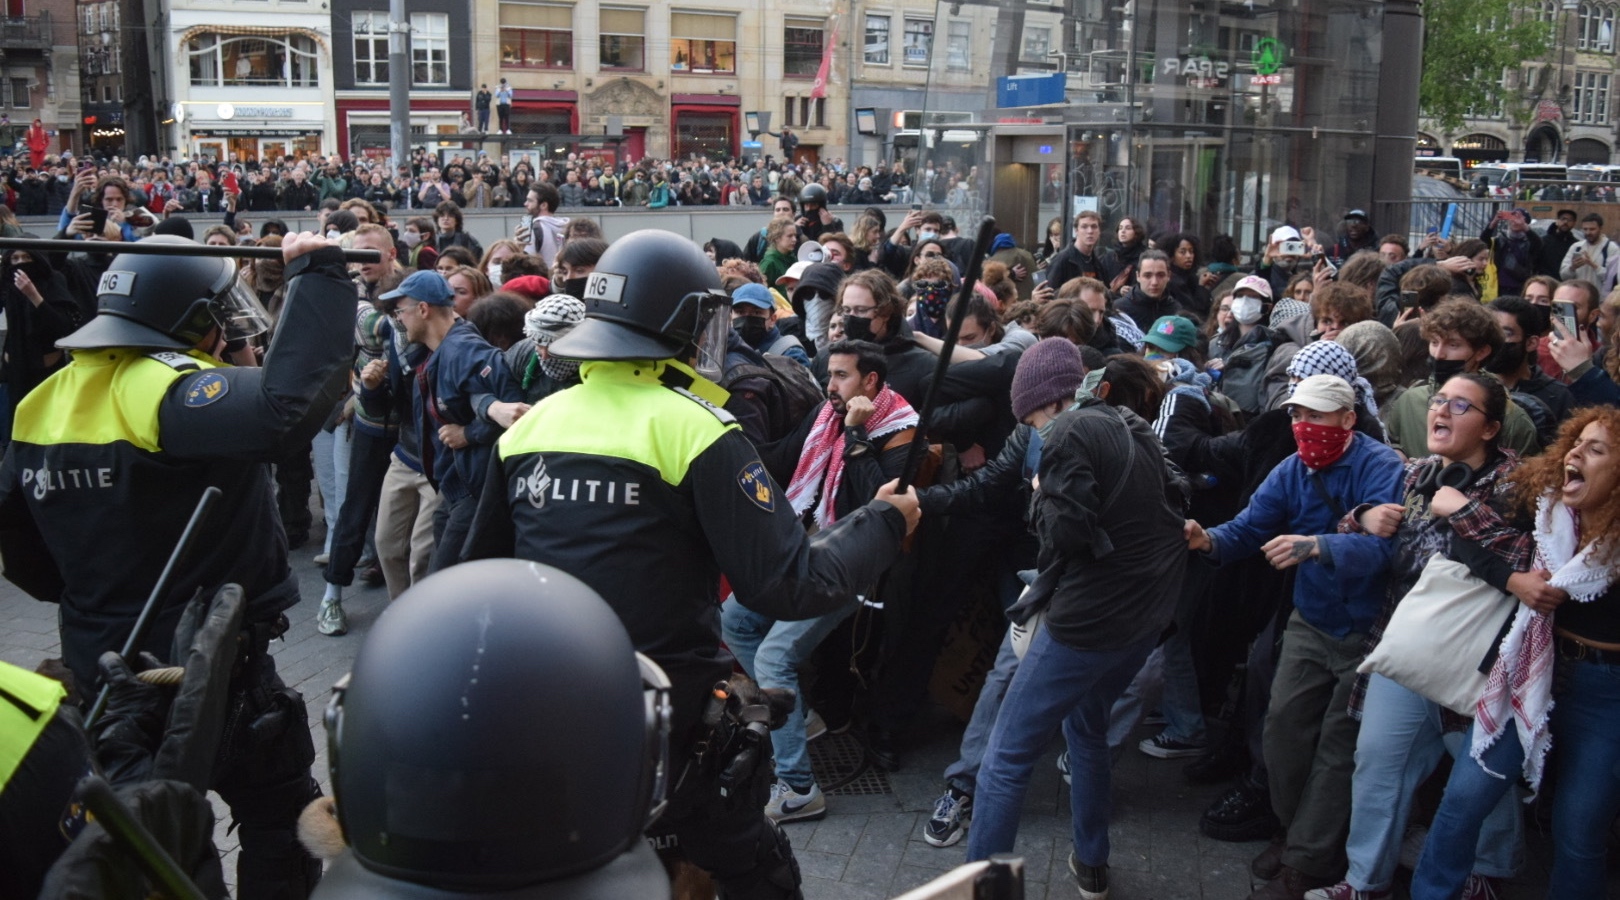 Police and protesters clash in Amsterdam as successive pro-Palestinian encampments roil city